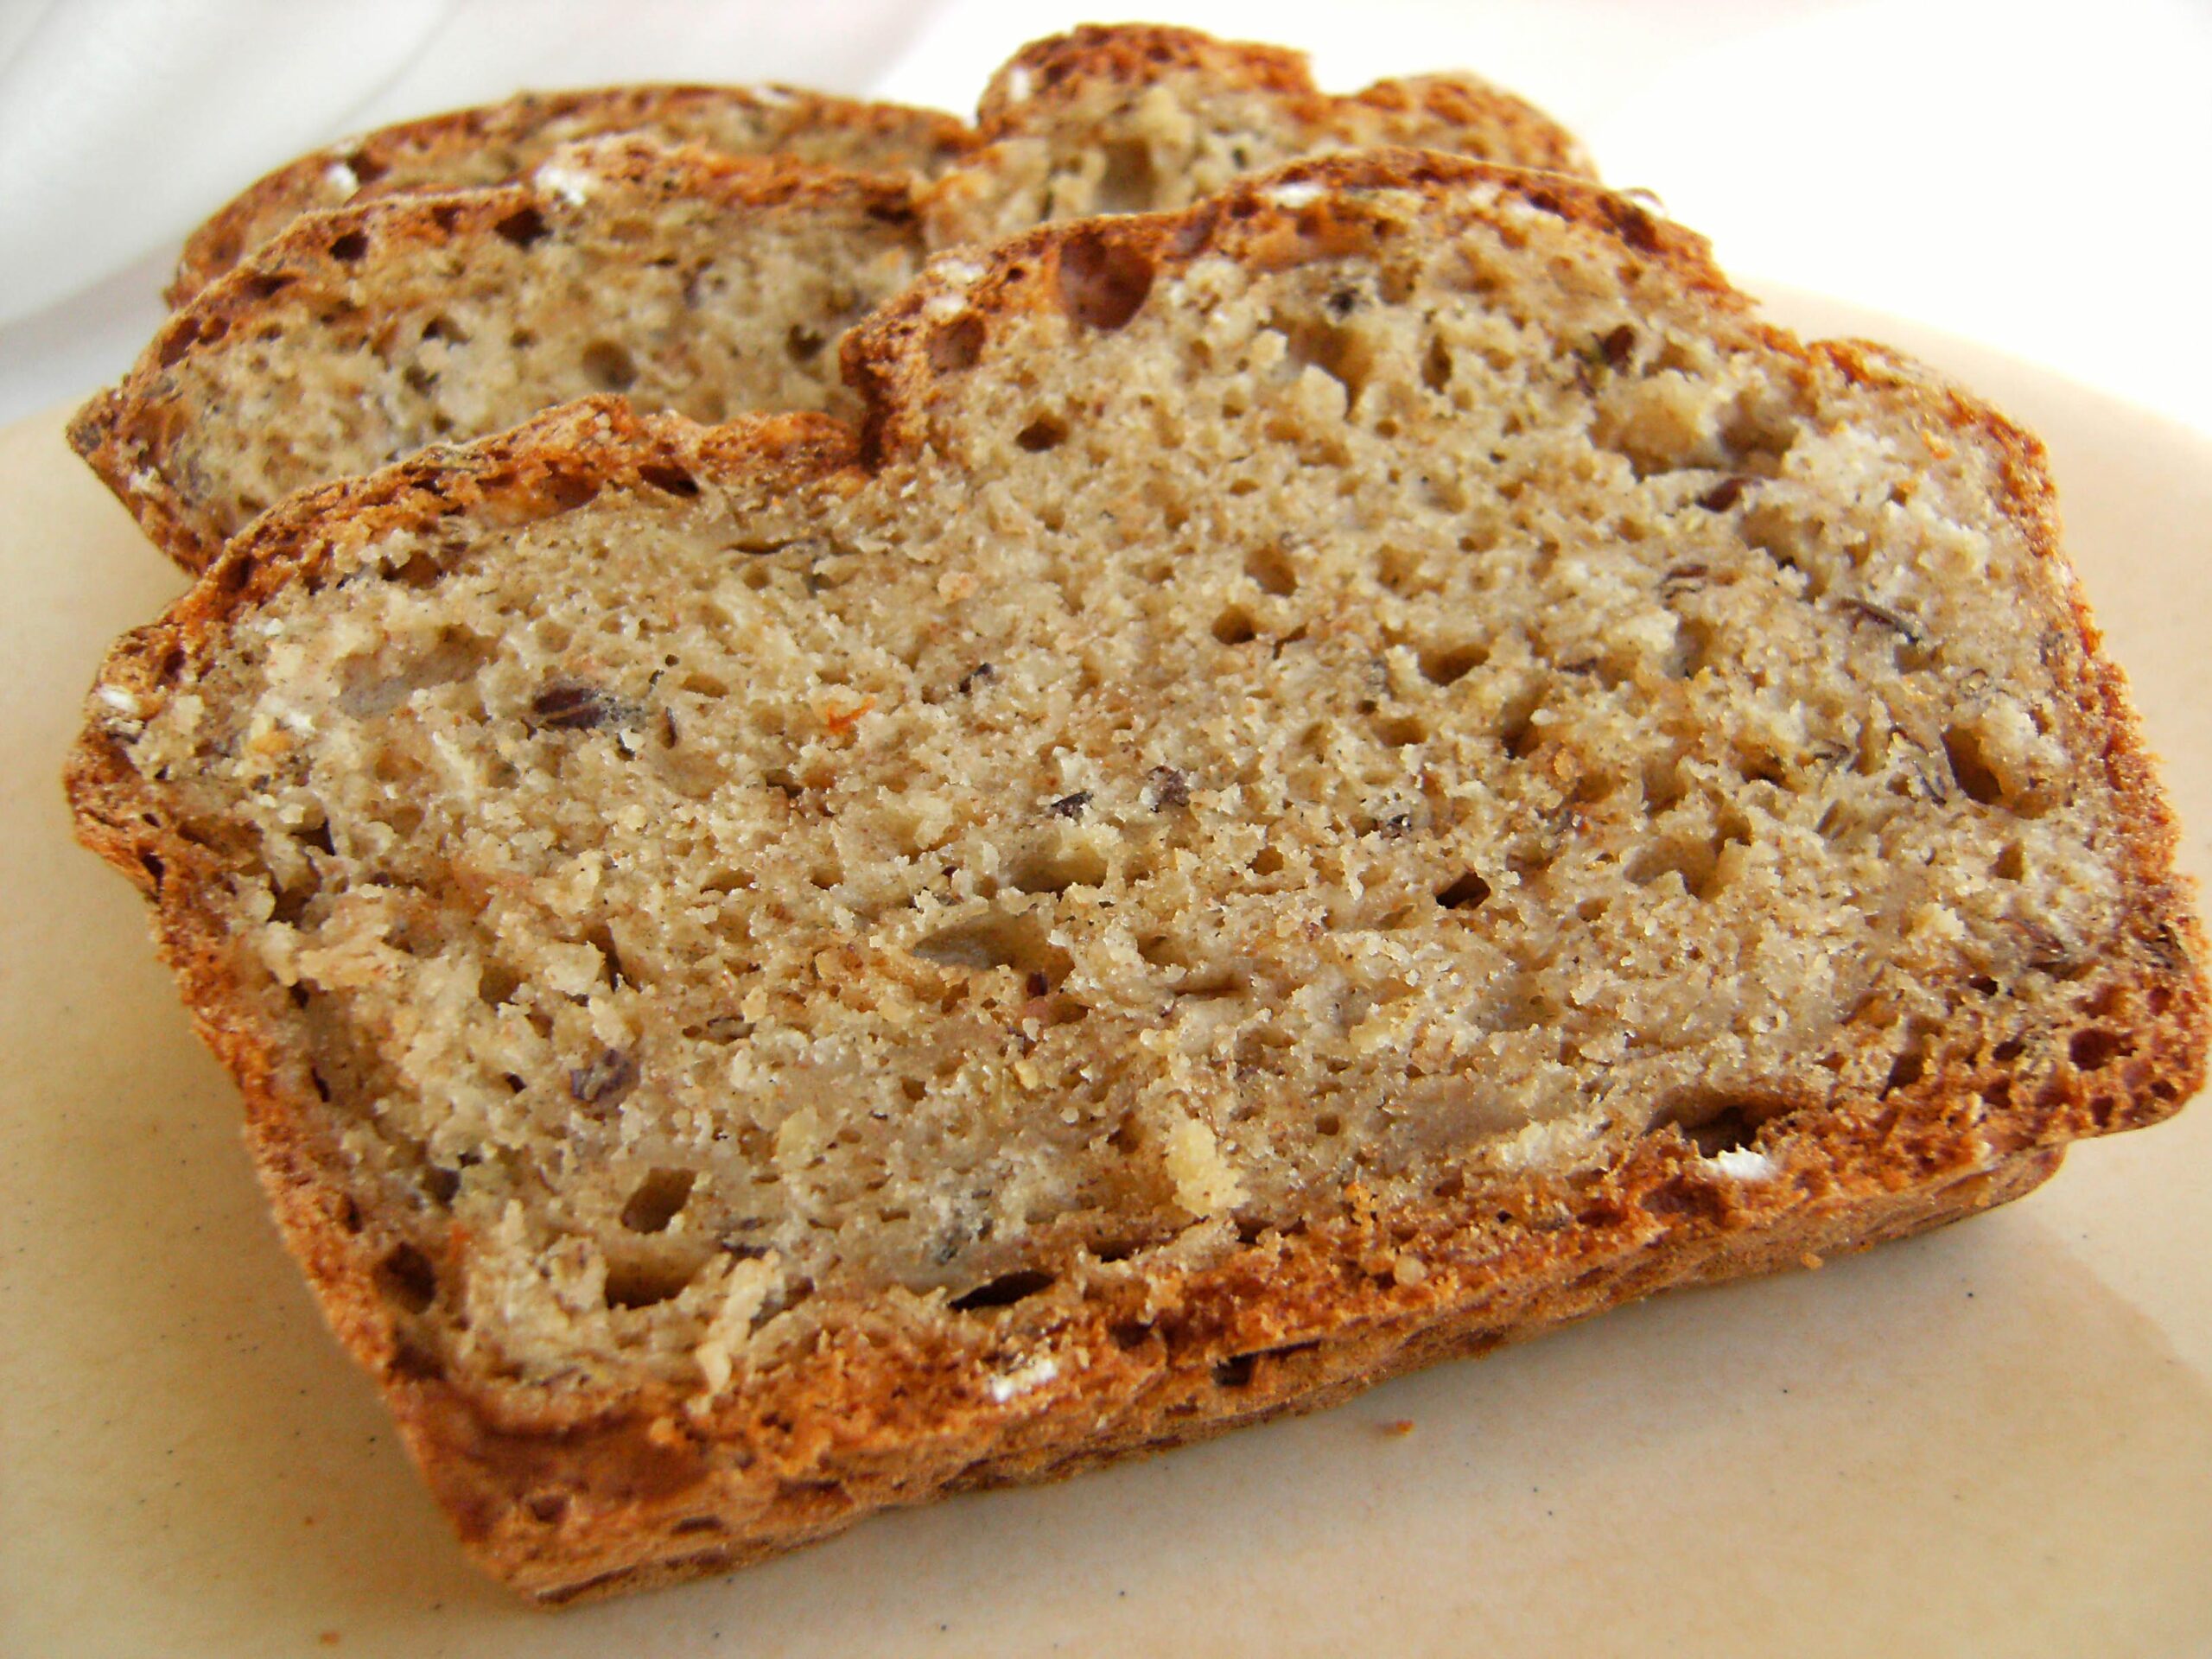  The hearty texture of this Irish brown bread pairs perfectly with a warm bowl of soup or stew.